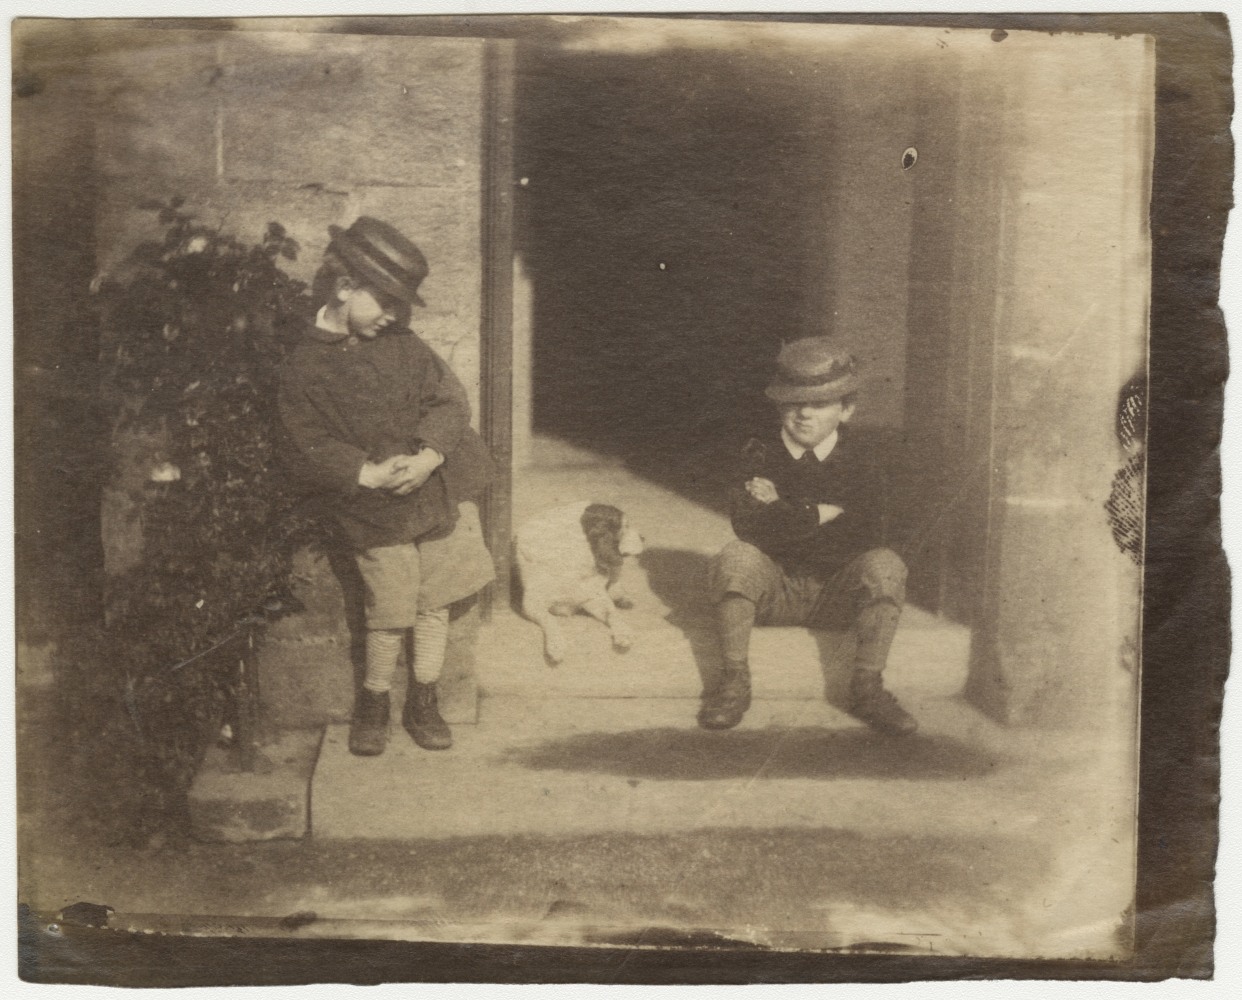 Rev. Calvert Richard JONES (Welsh, 1802-1877) Two little boys with hats and a dog, 1850s Albumen print from a glass negative 10.0 x 12.2 cm on 10.3 x 13.1 cm paper